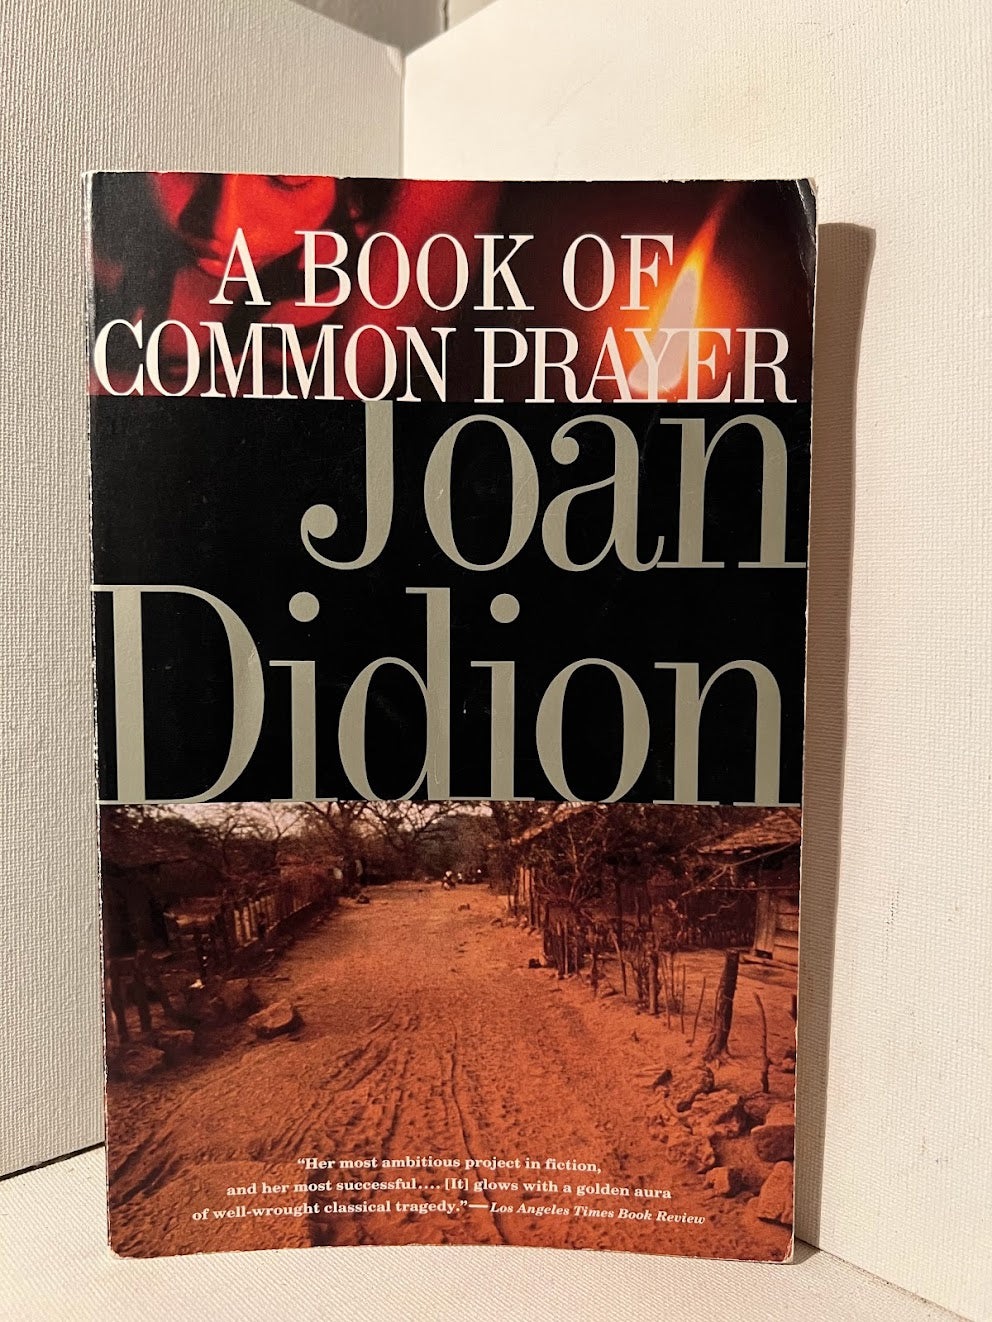 A Book of Common Prayer by Joan Didion